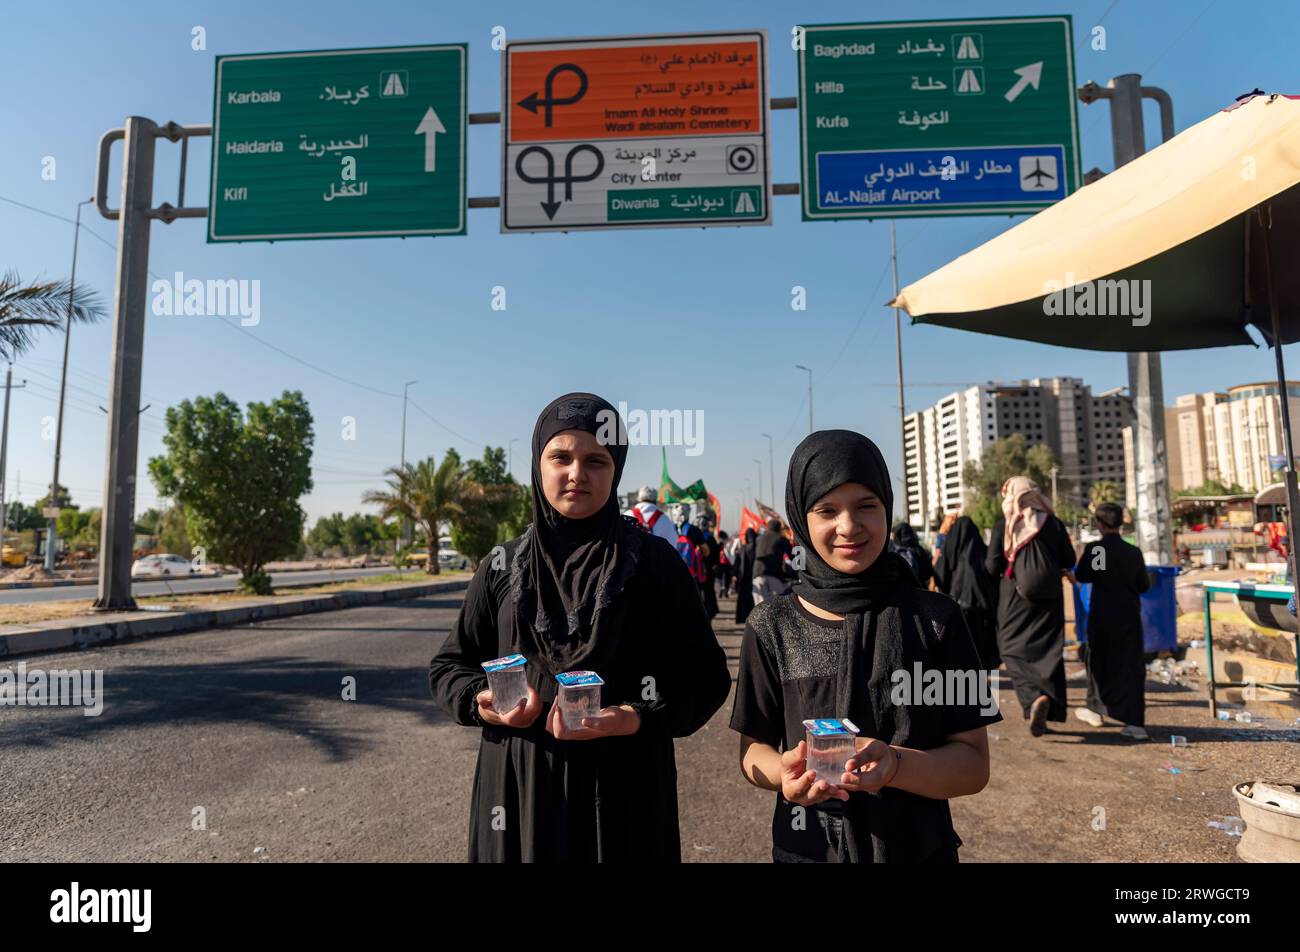 Iraqi Shia girls distribute water among Shia Muslim pilgrims marching from Najaf towards Shrine city of Karbala. Every year, millions of Shia Muslims and some from other faiths undertake a 20-day pilgrimage on foot from various cities in Iraq and Iran to the holy city of Karbala. This pilgrimage is in remembrance of Imam Hussein, the grandson of the Prophet Muhammad, who died in a battle in 680 AD. On the 40th day of mourning for Hussein, known as Arbaeen, pilgrims converge in Karbala to pay tribute at his shrine. Along the way, volunteers provide food, water, and shelter, and villagers open t Stock Photo